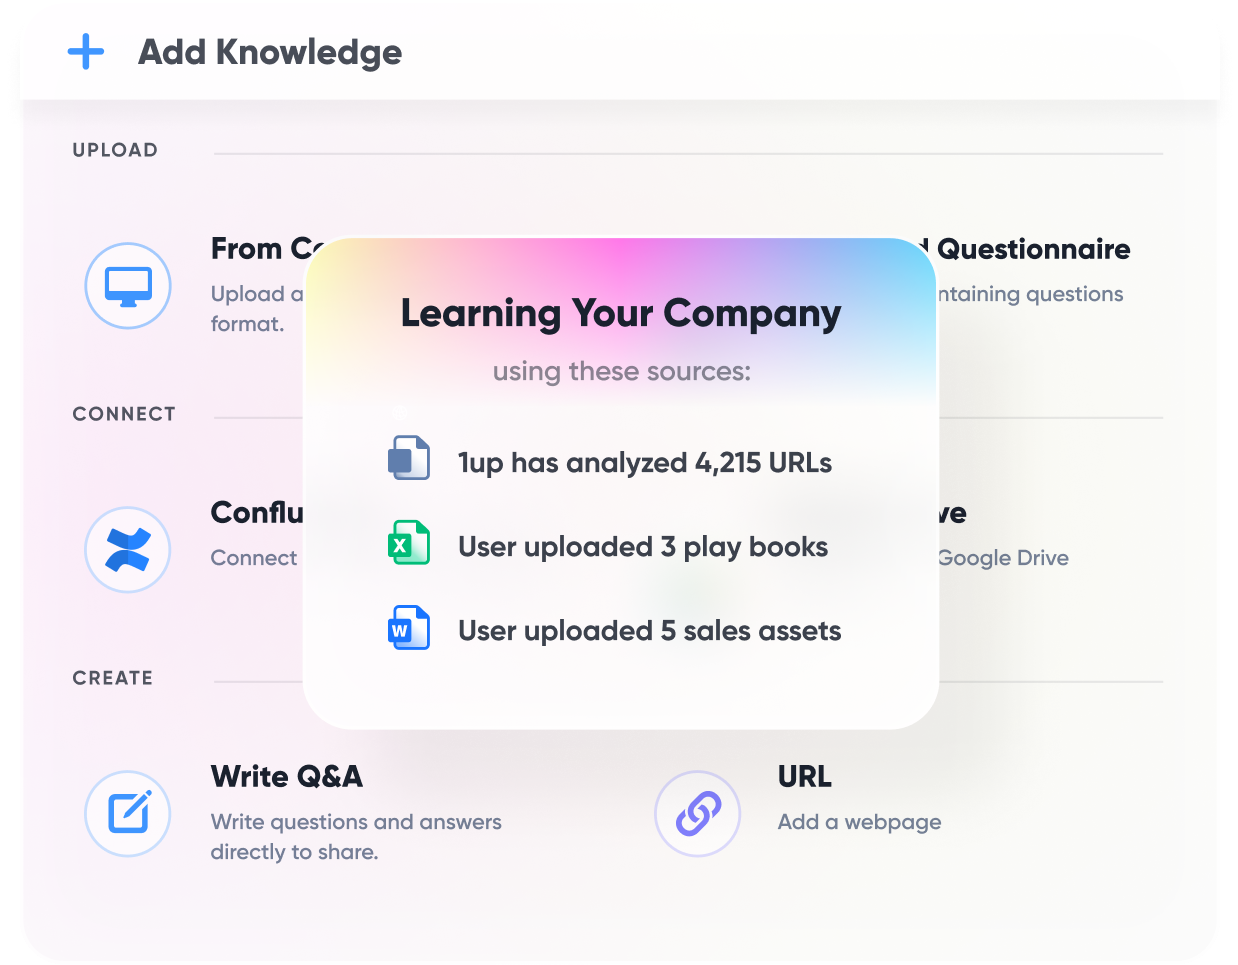 Add Knowledge - Learning Your Company